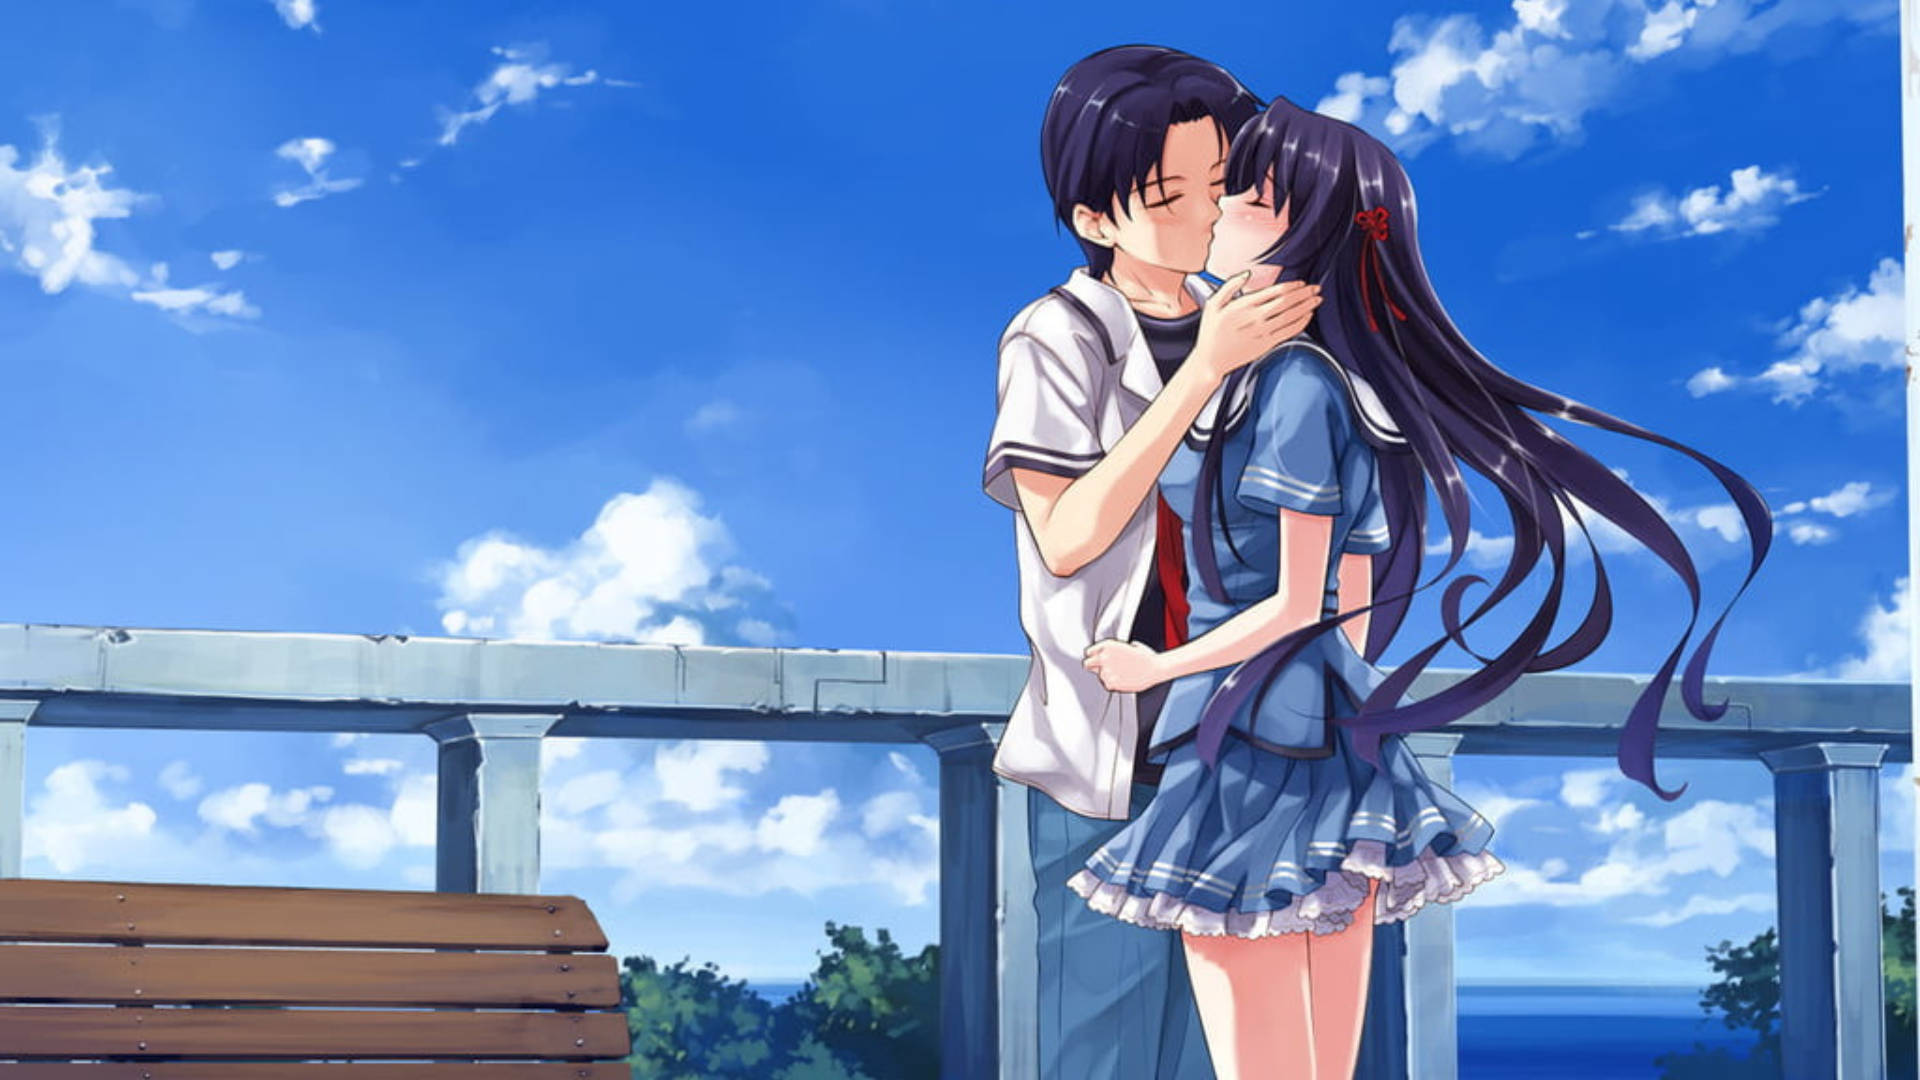 Download Anime Couple Kiss Scene On A Sunny Day Wallpaper 